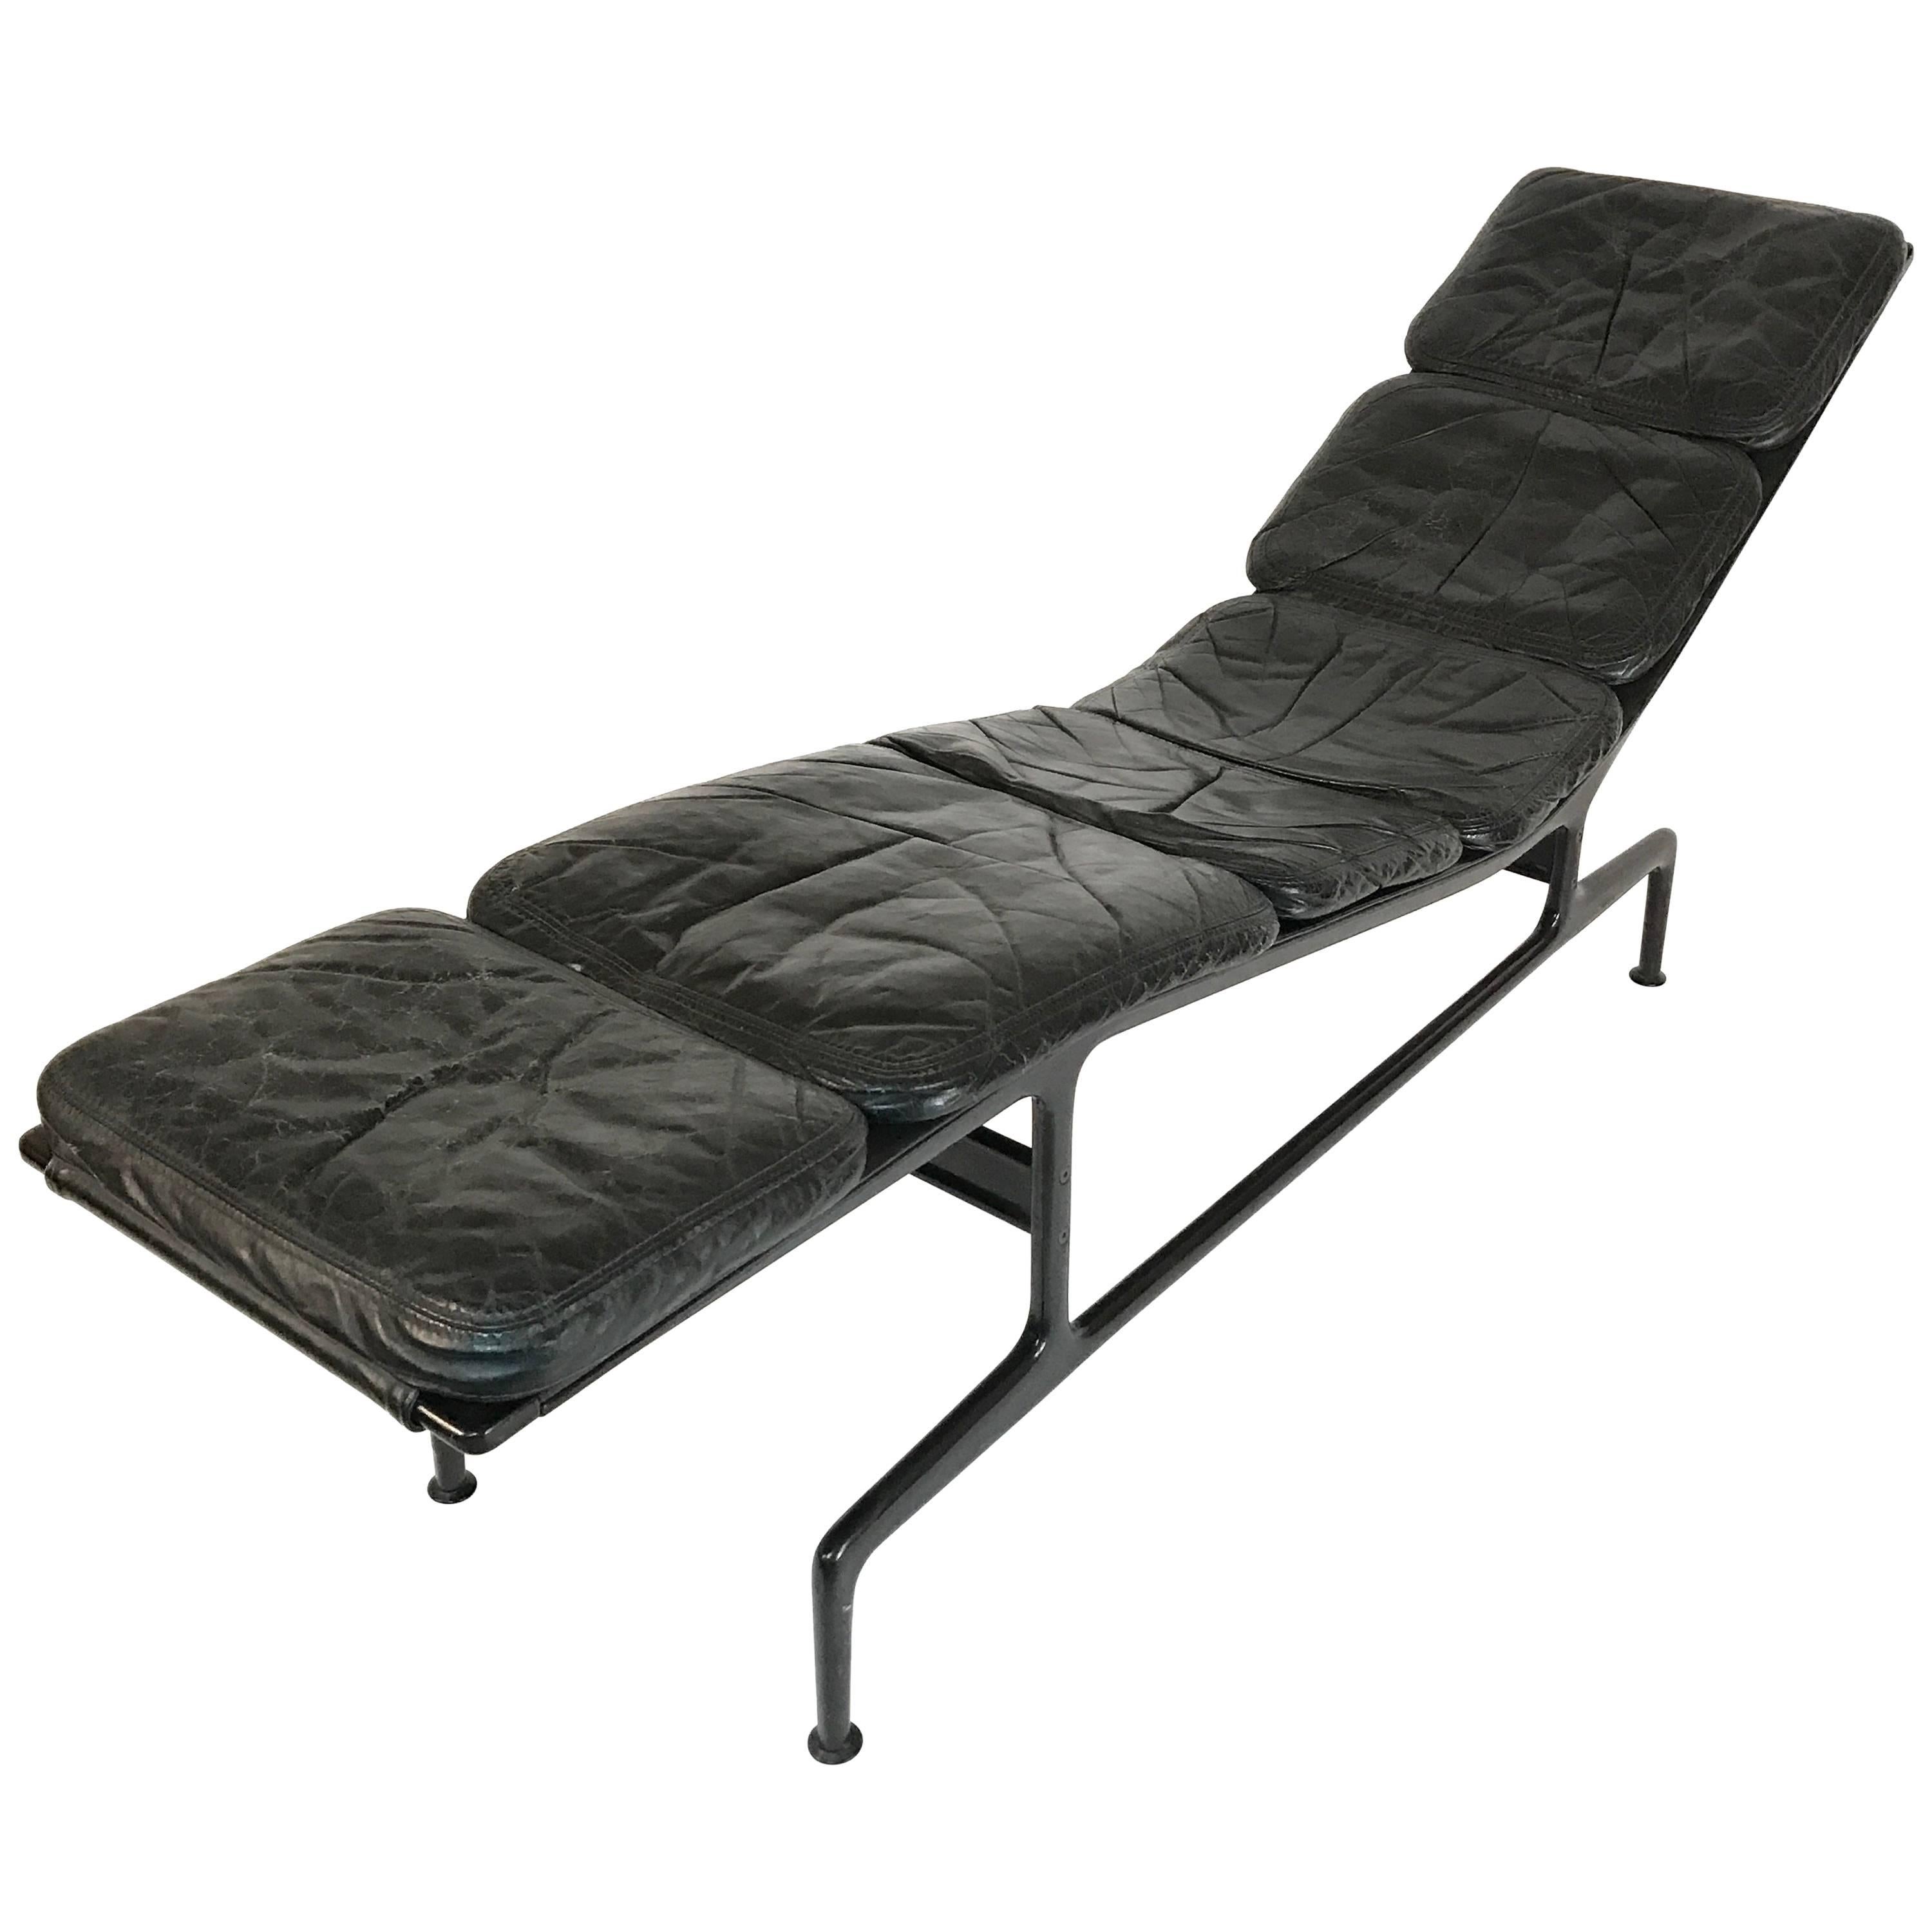 Charles Eames for Herman Miller ''Billy Wilder'' Leather Chaise Lounge